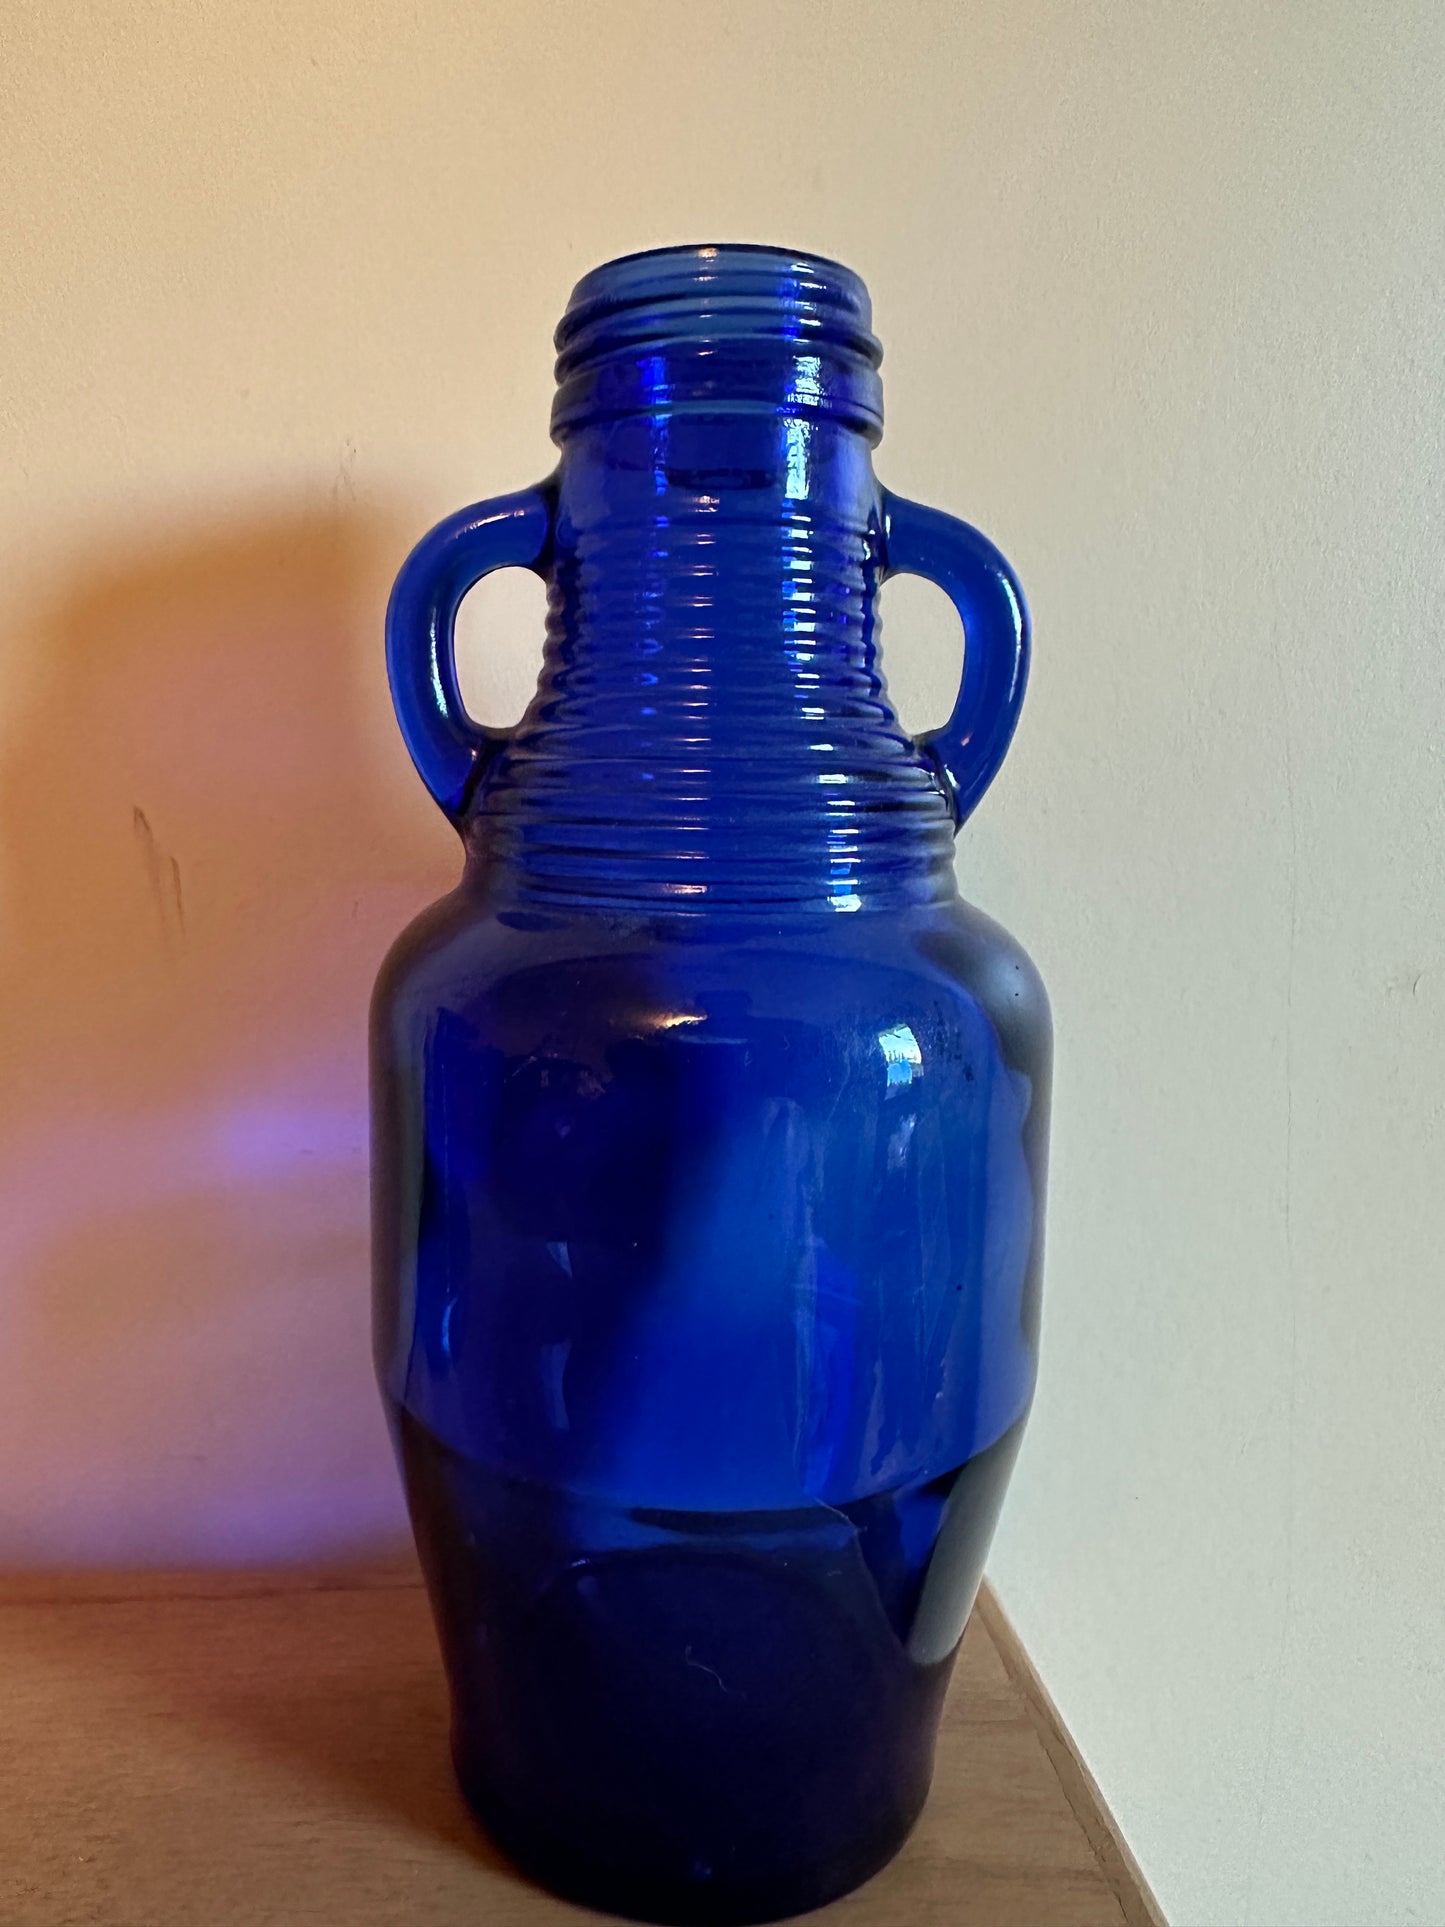 Assortment of Vintage Apothecary Blue Bottles